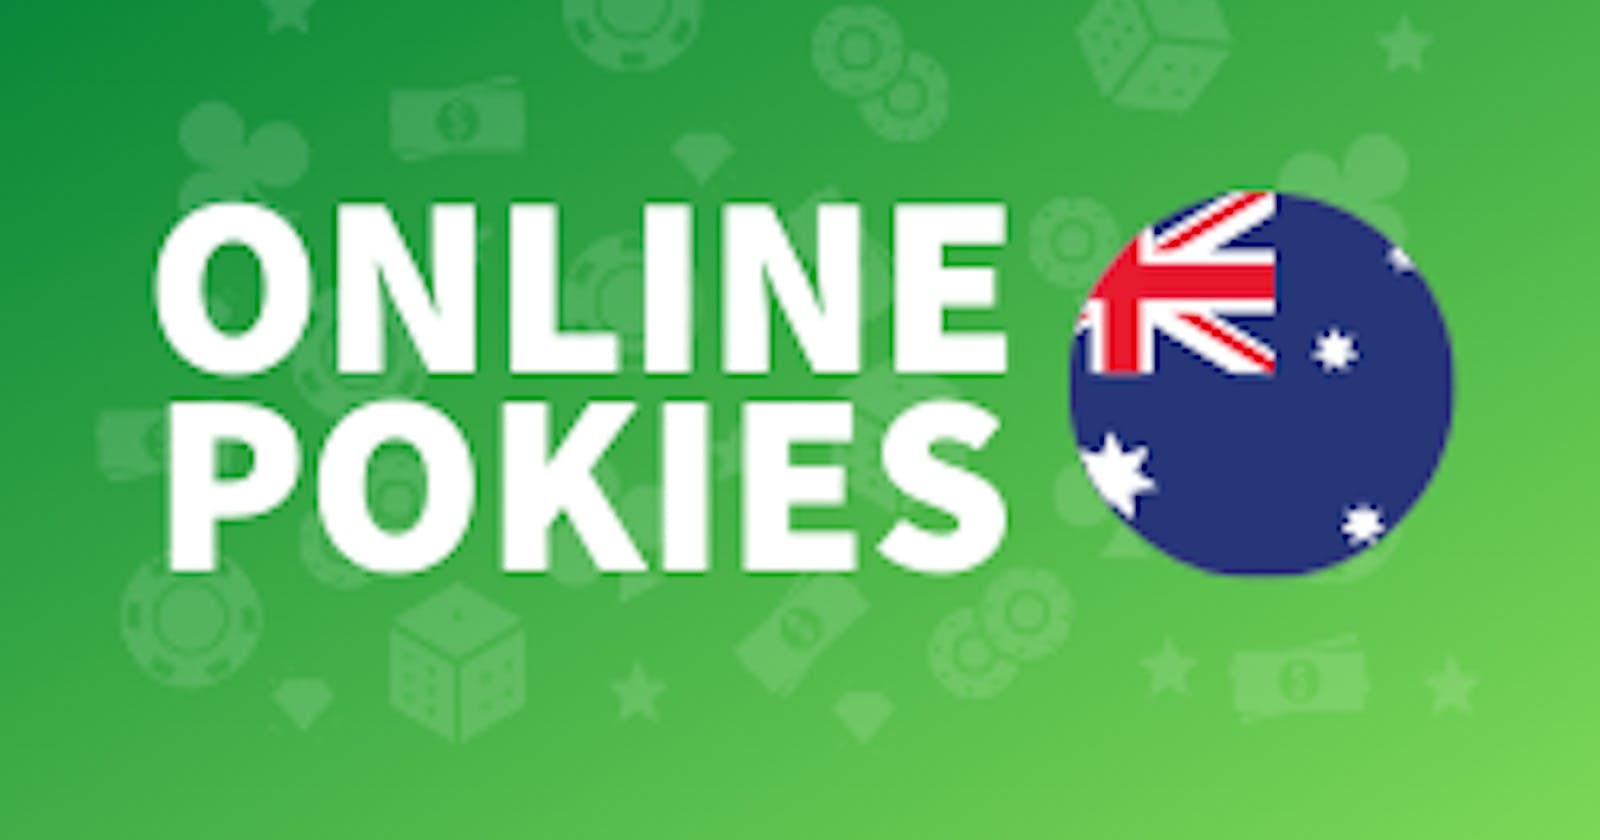 Our The Pokies Casino online casino offers the best bonuses in the world, so you have nothing to lose